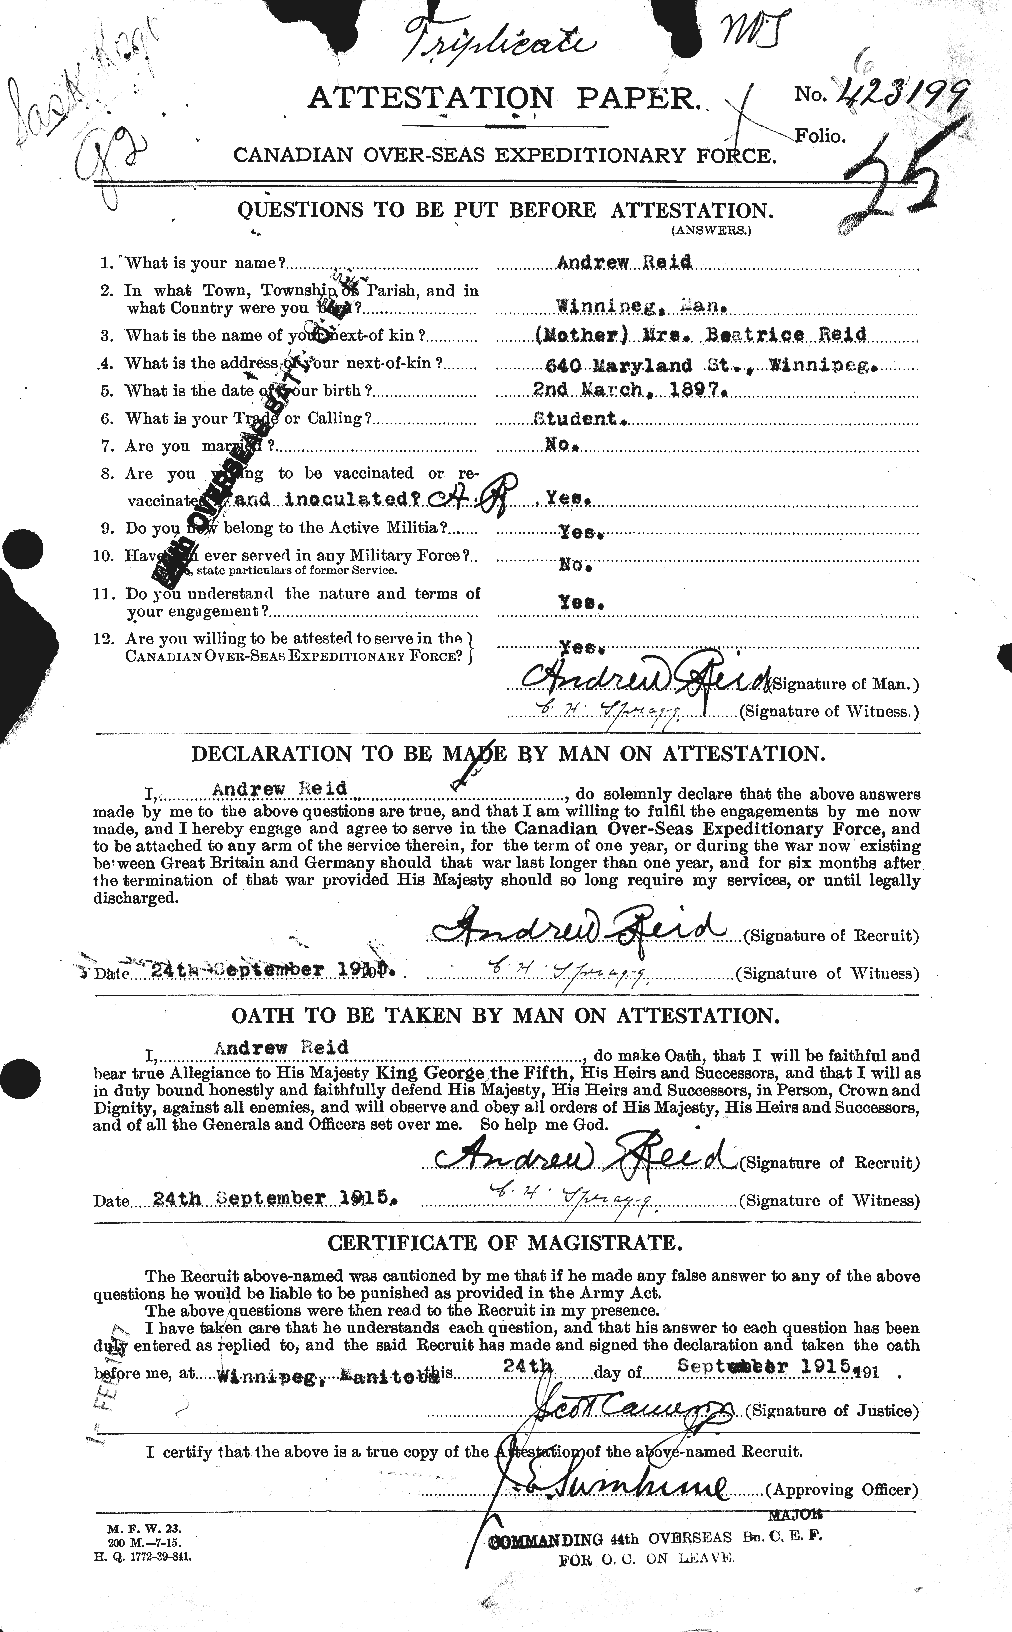 Personnel Records of the First World War - CEF 597814a